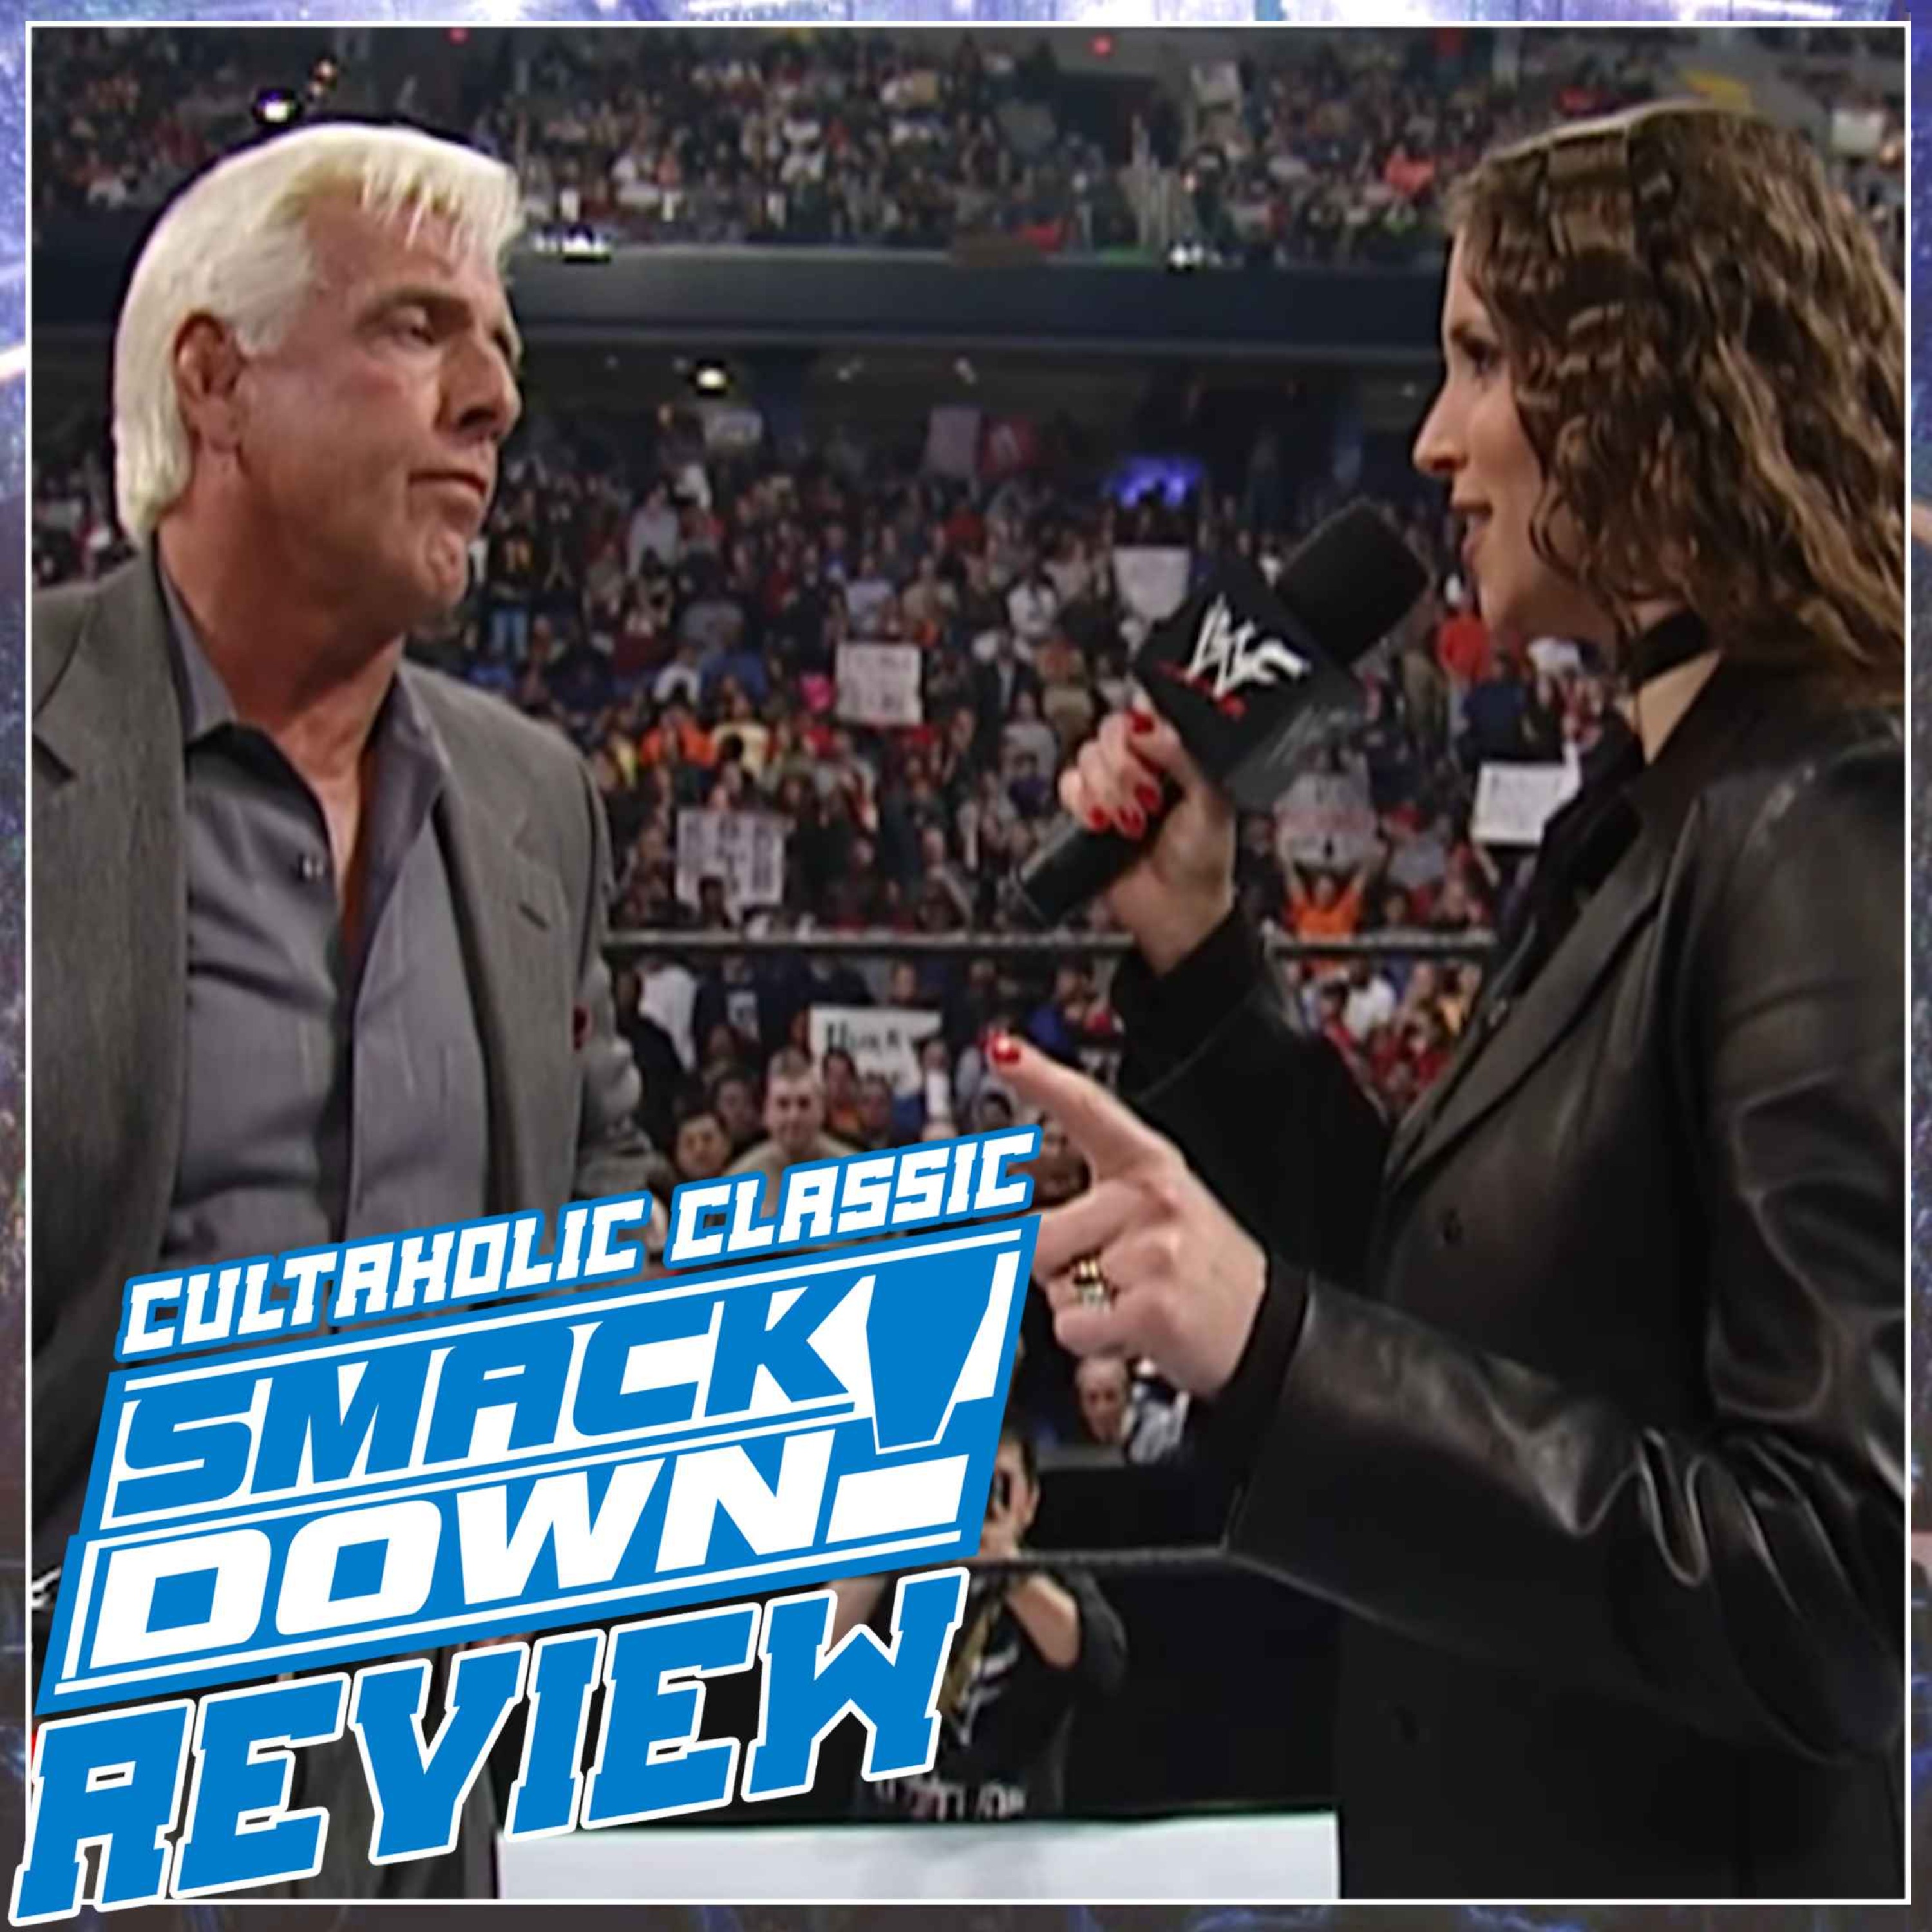 WWE SmackDown #125: Stephanie McMahon-Helmsley Confronts Ric Flair, Royal Rumble Title Match Confirmed | CULTAHOLIC CLASSIC SMACKDOWN REVIEW